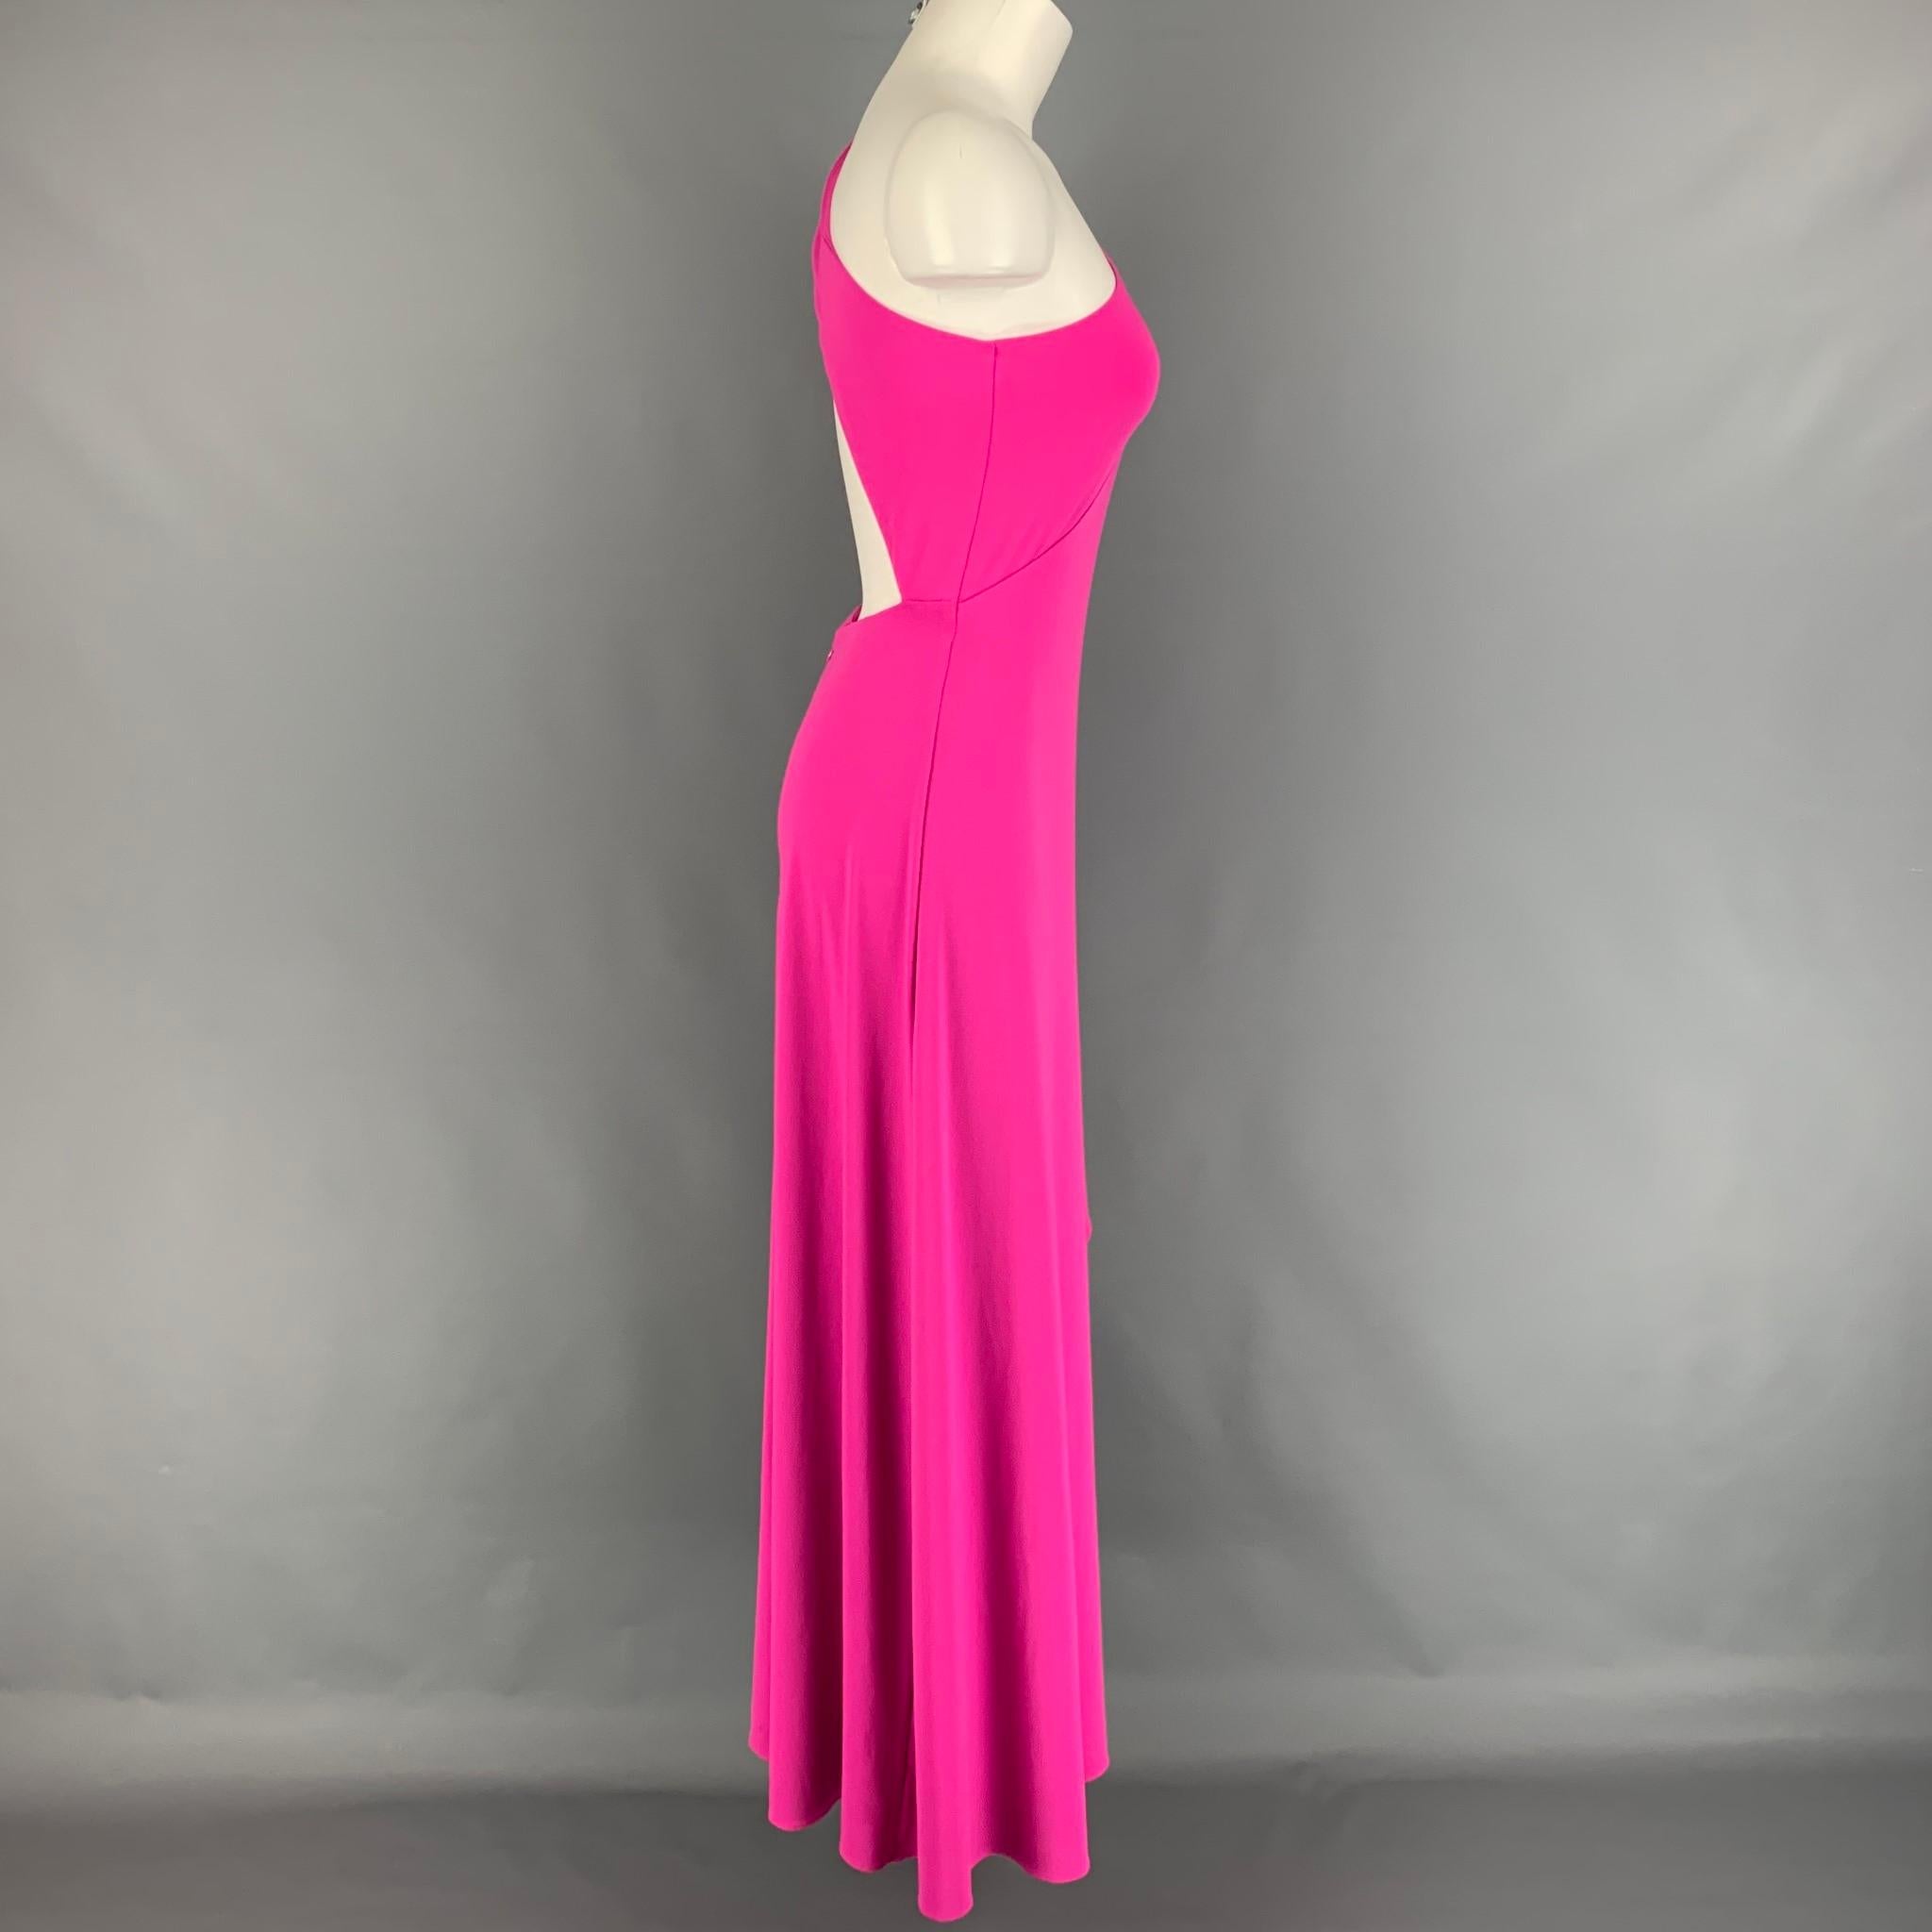 HALSTON HERITAGE dress comes in a pink material with a slip liner featuring a back less style, one shoulder, and a back zip up closure. 

Good Pre-Owned Condition. Light discoloration.
Marked: 2

Measurements:

Bust: 27 in.
Waist: 26 in.
Hip: 32